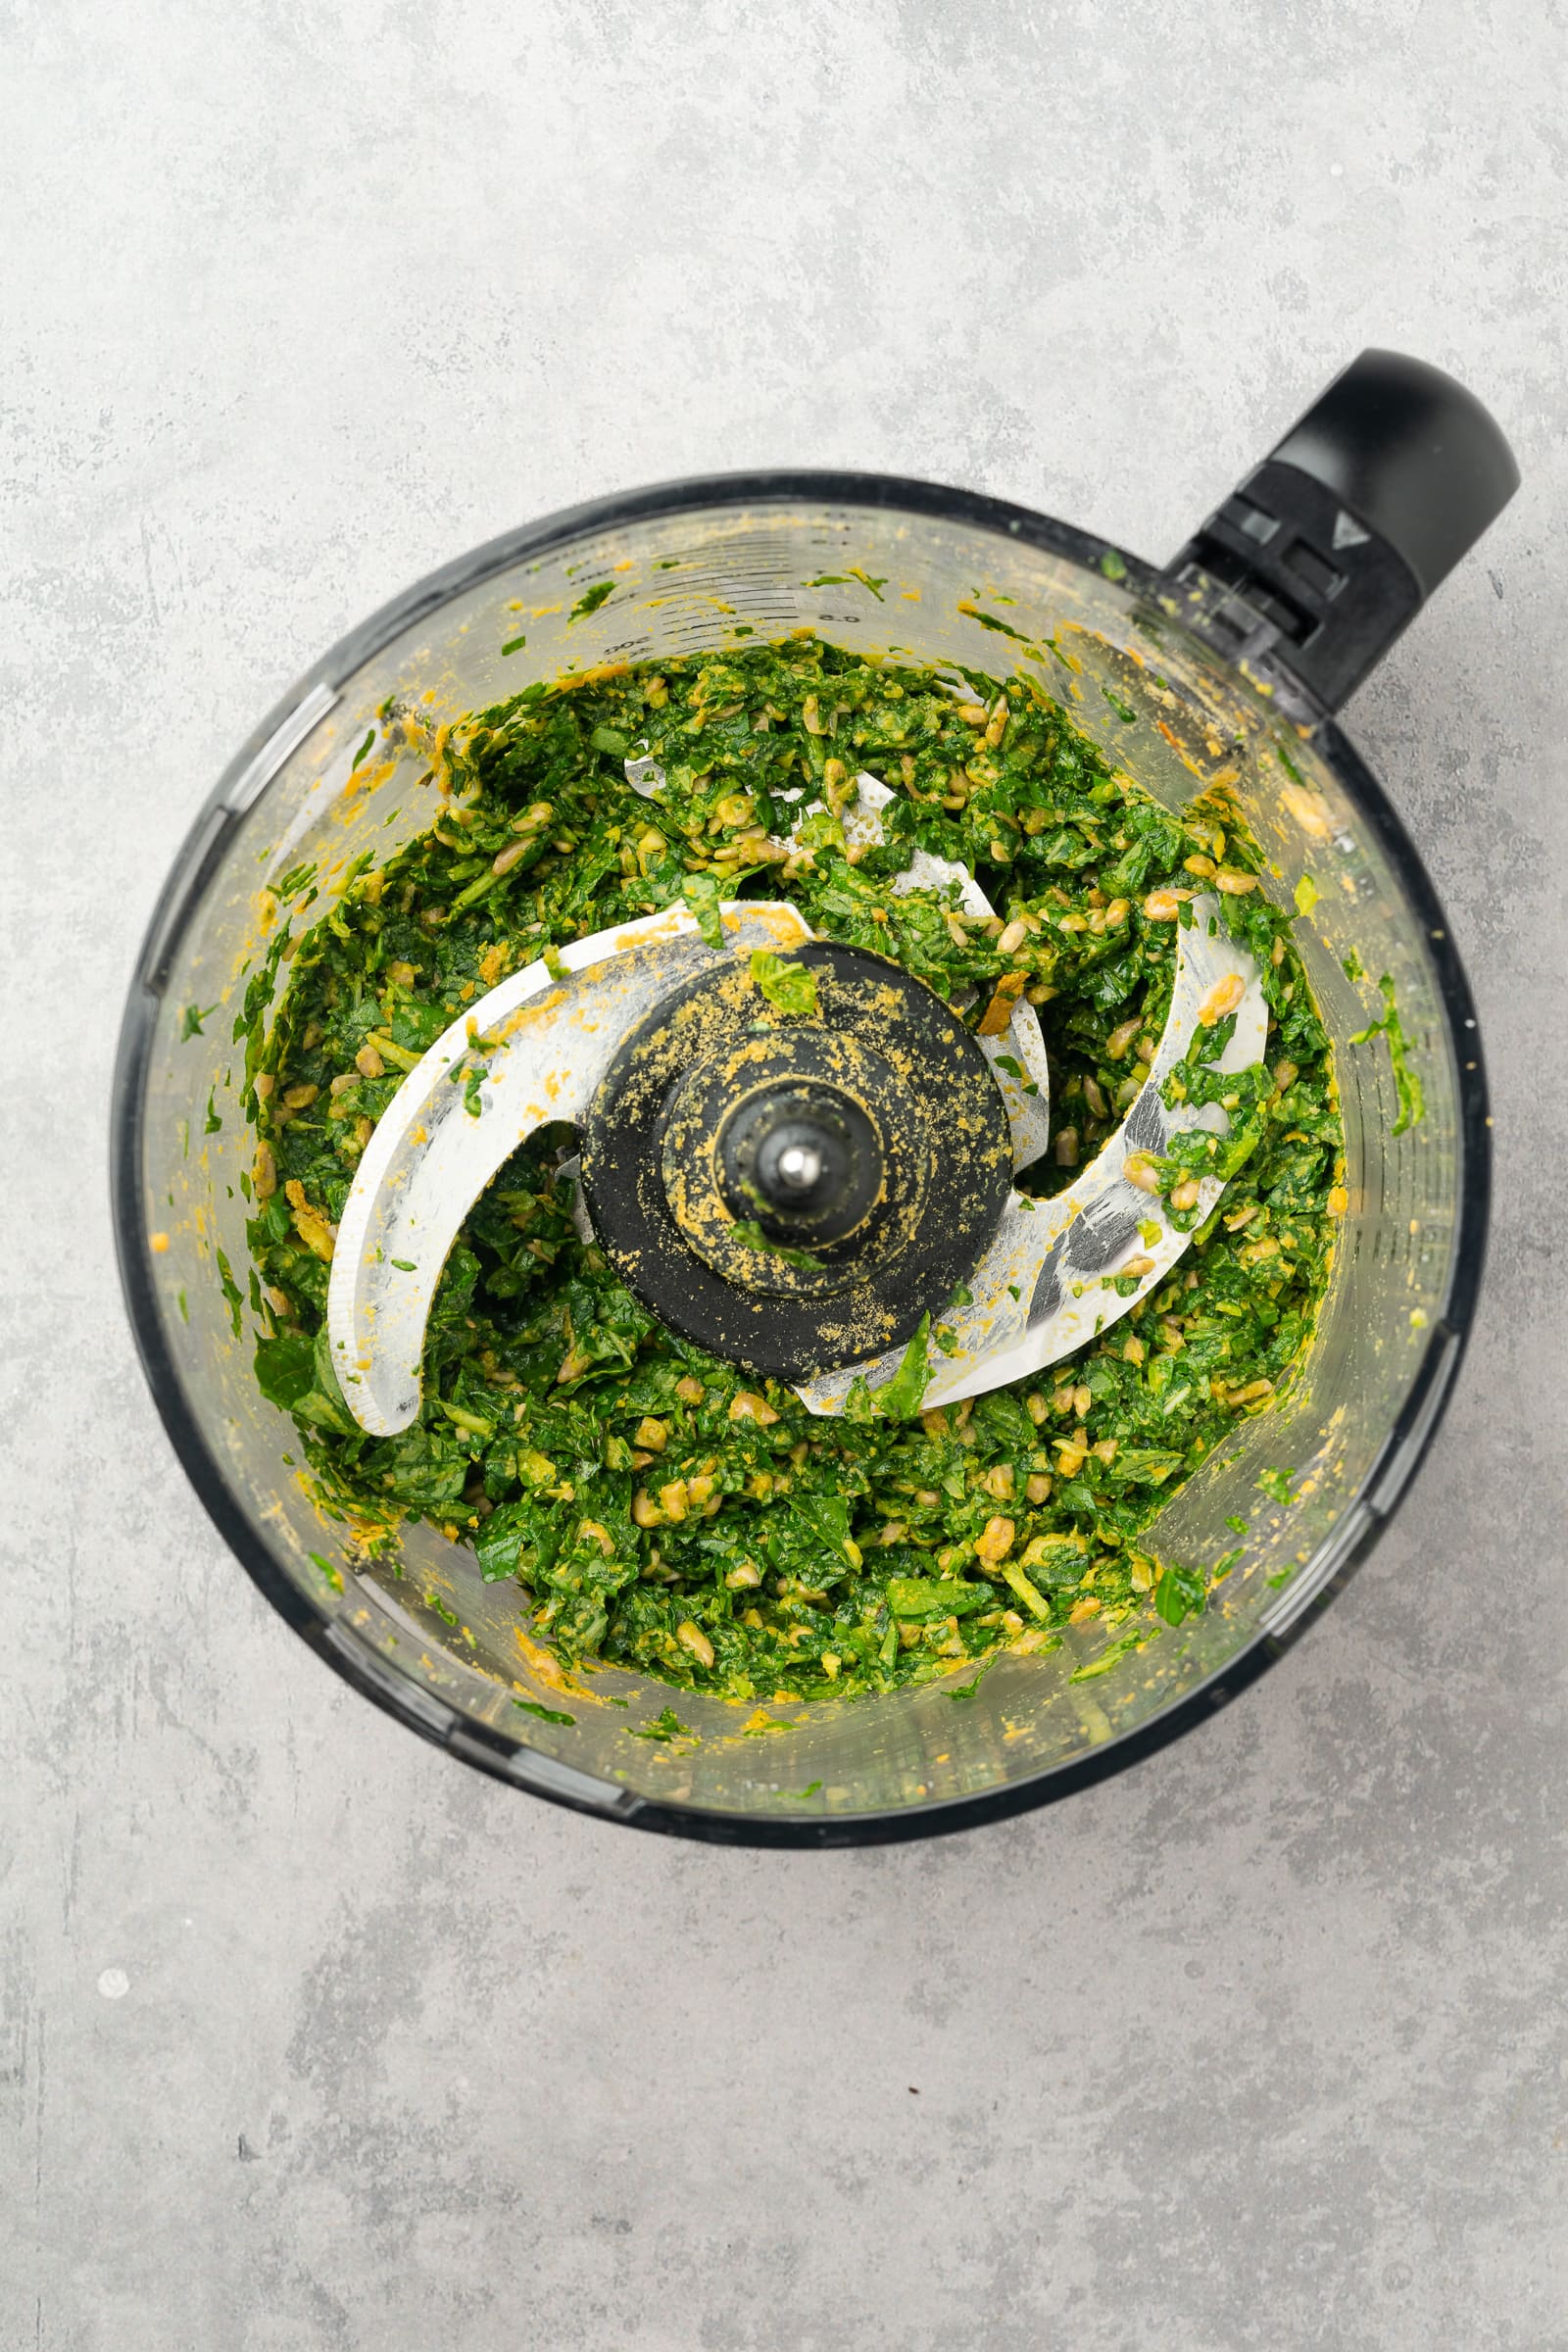 Ingredients for pesto in a food processor before adding olive oil.